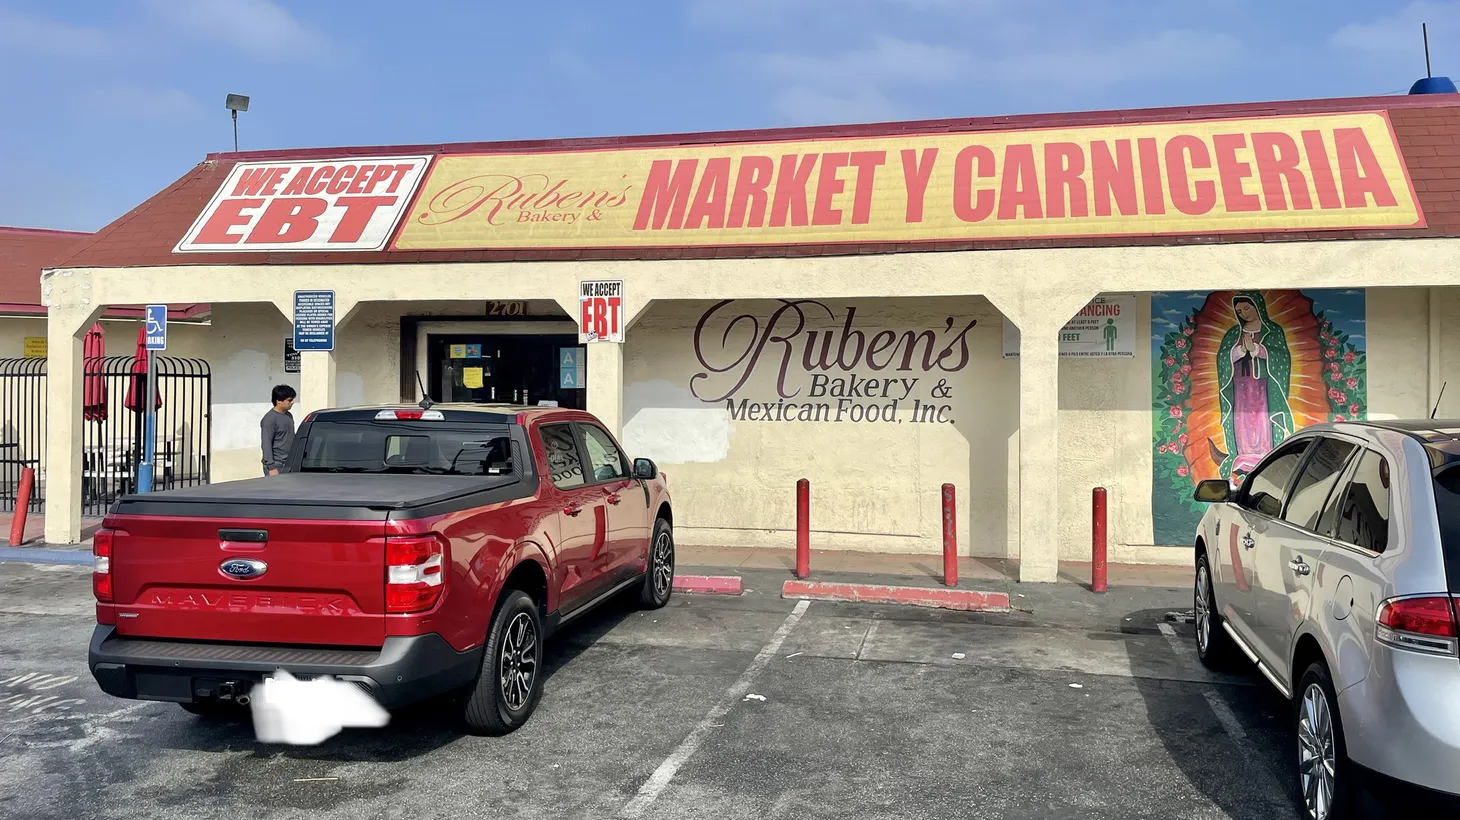 This year, there’s a big upset by Ruben’s Bakery, which becomes the first tortilleria from Compton’s underrated tortilla scene to make it into the Suave 16.